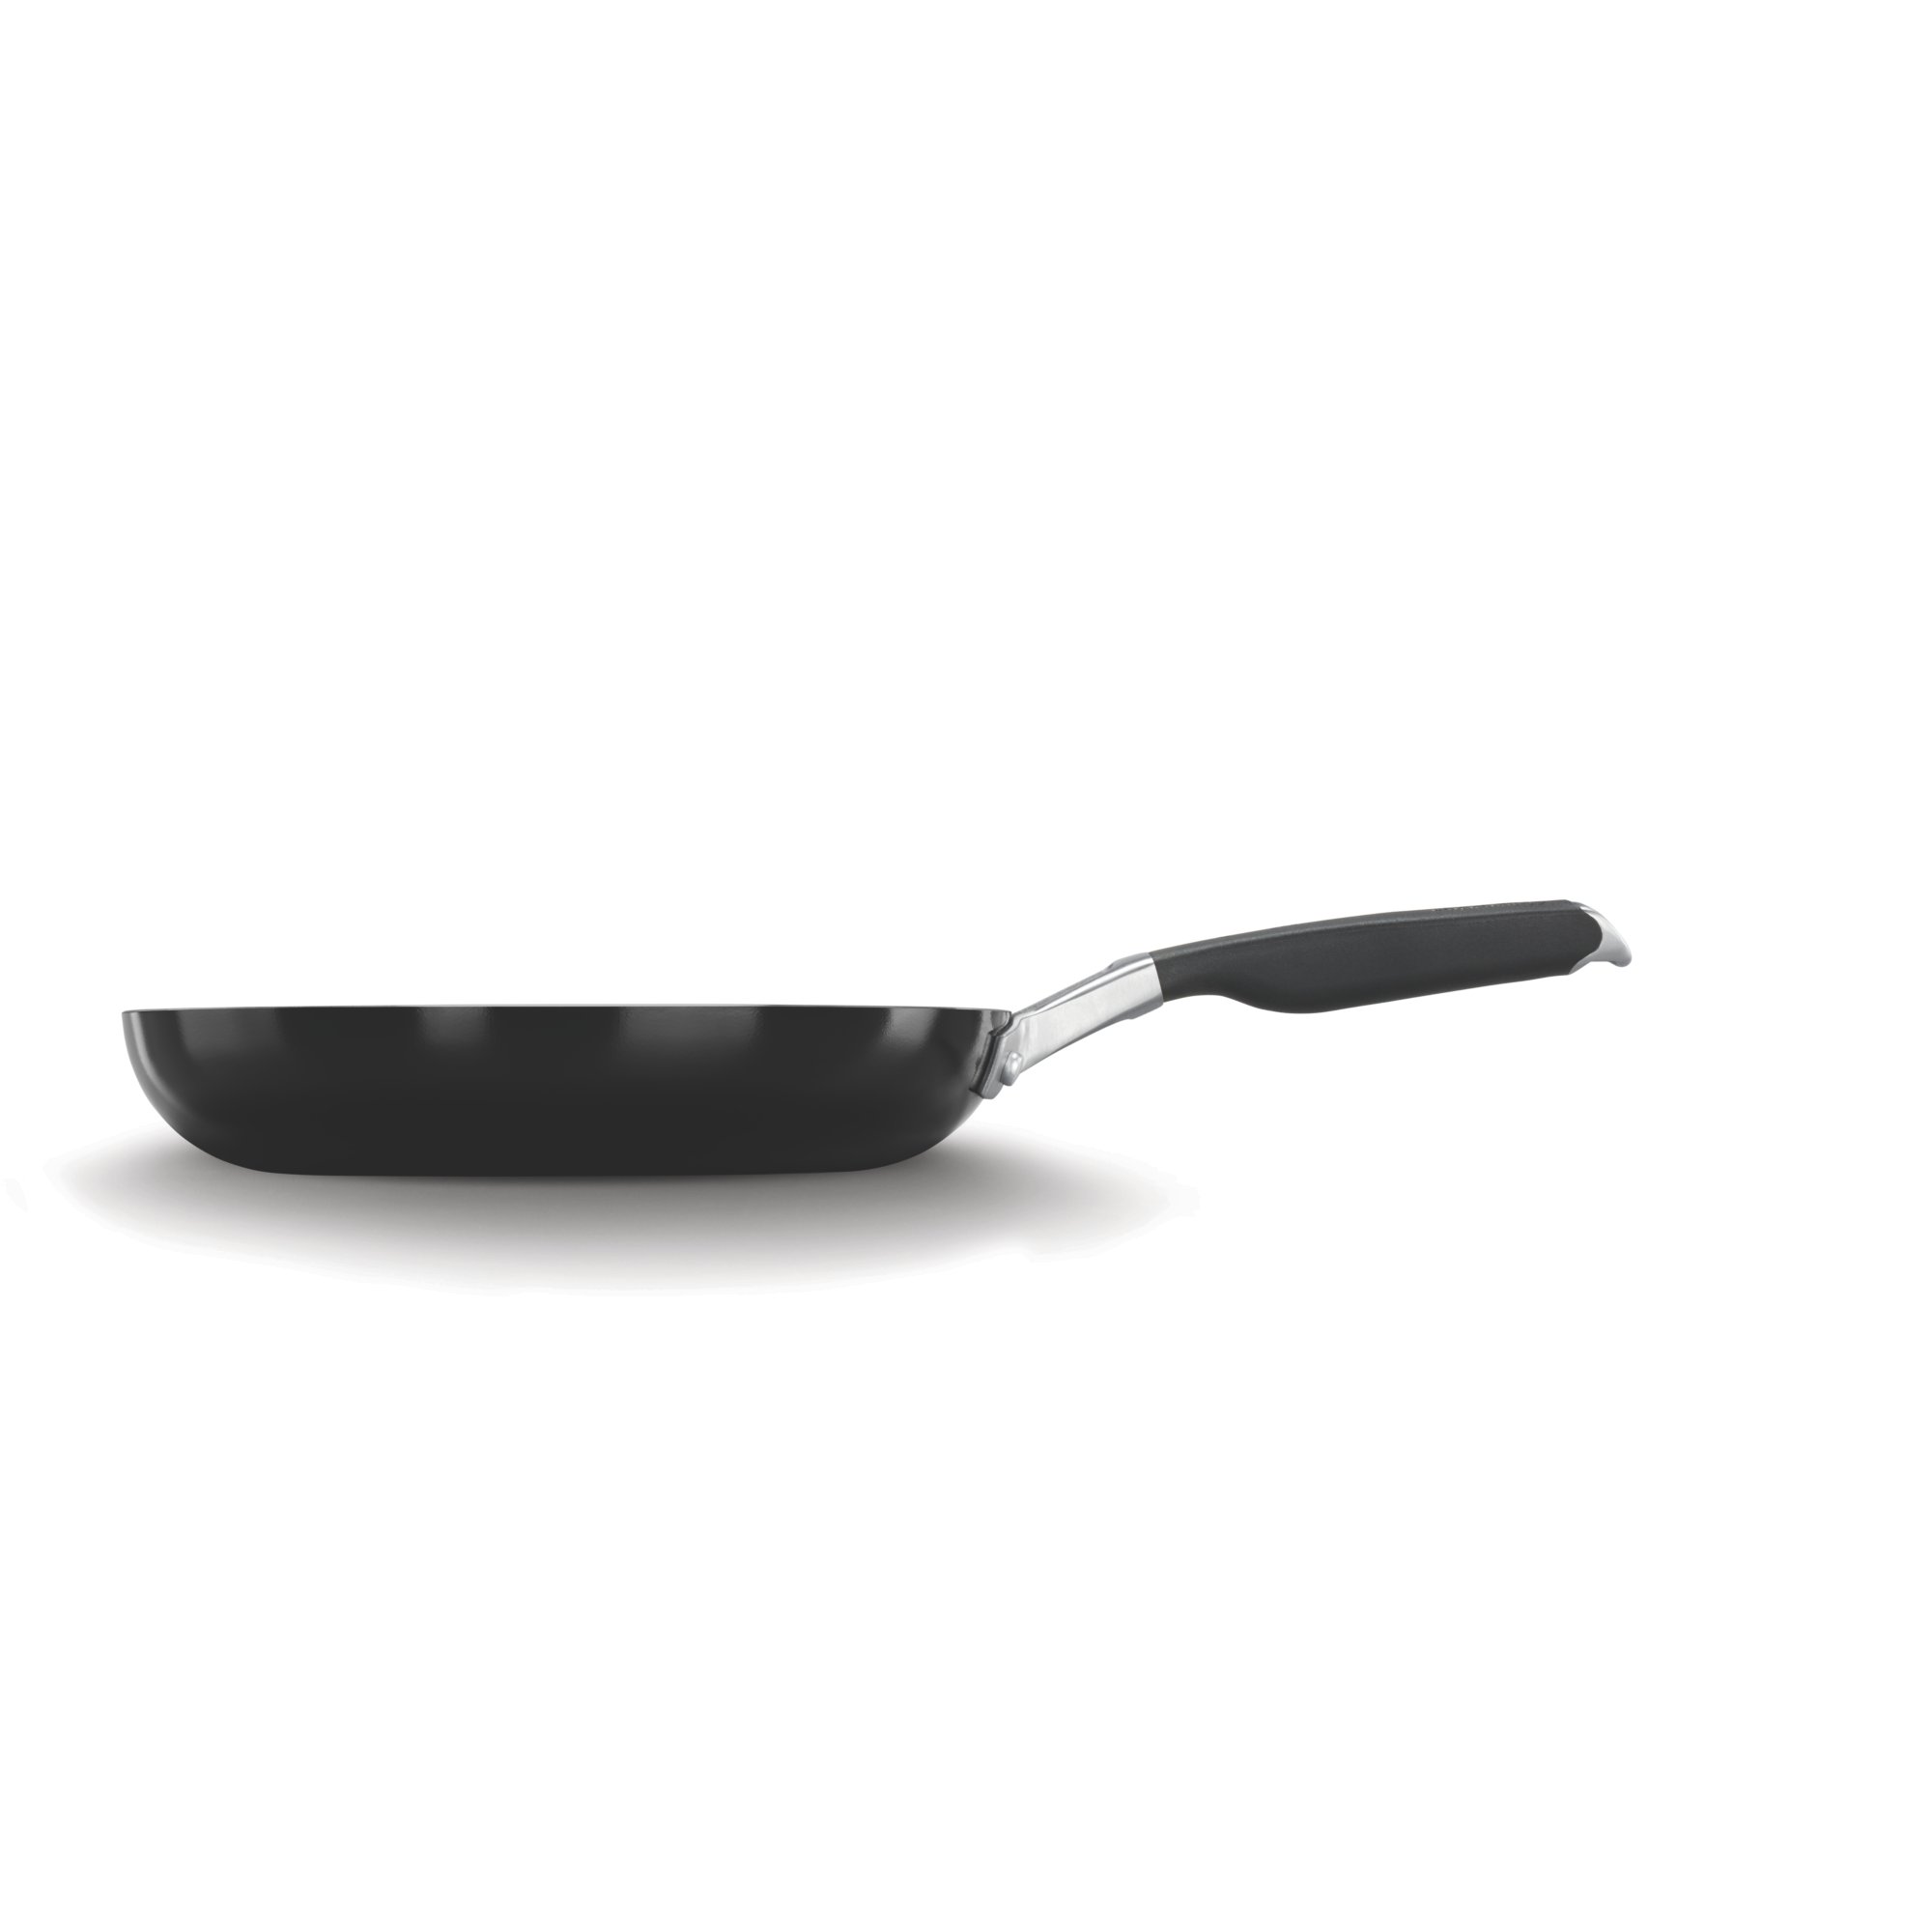 https://newellbrands.scene7.com/is/image/NewellRubbermaid/2064691-calphalon-cookware-select-10in-fry-no-food-side-view-straight-on?wid=2000&hei=2000